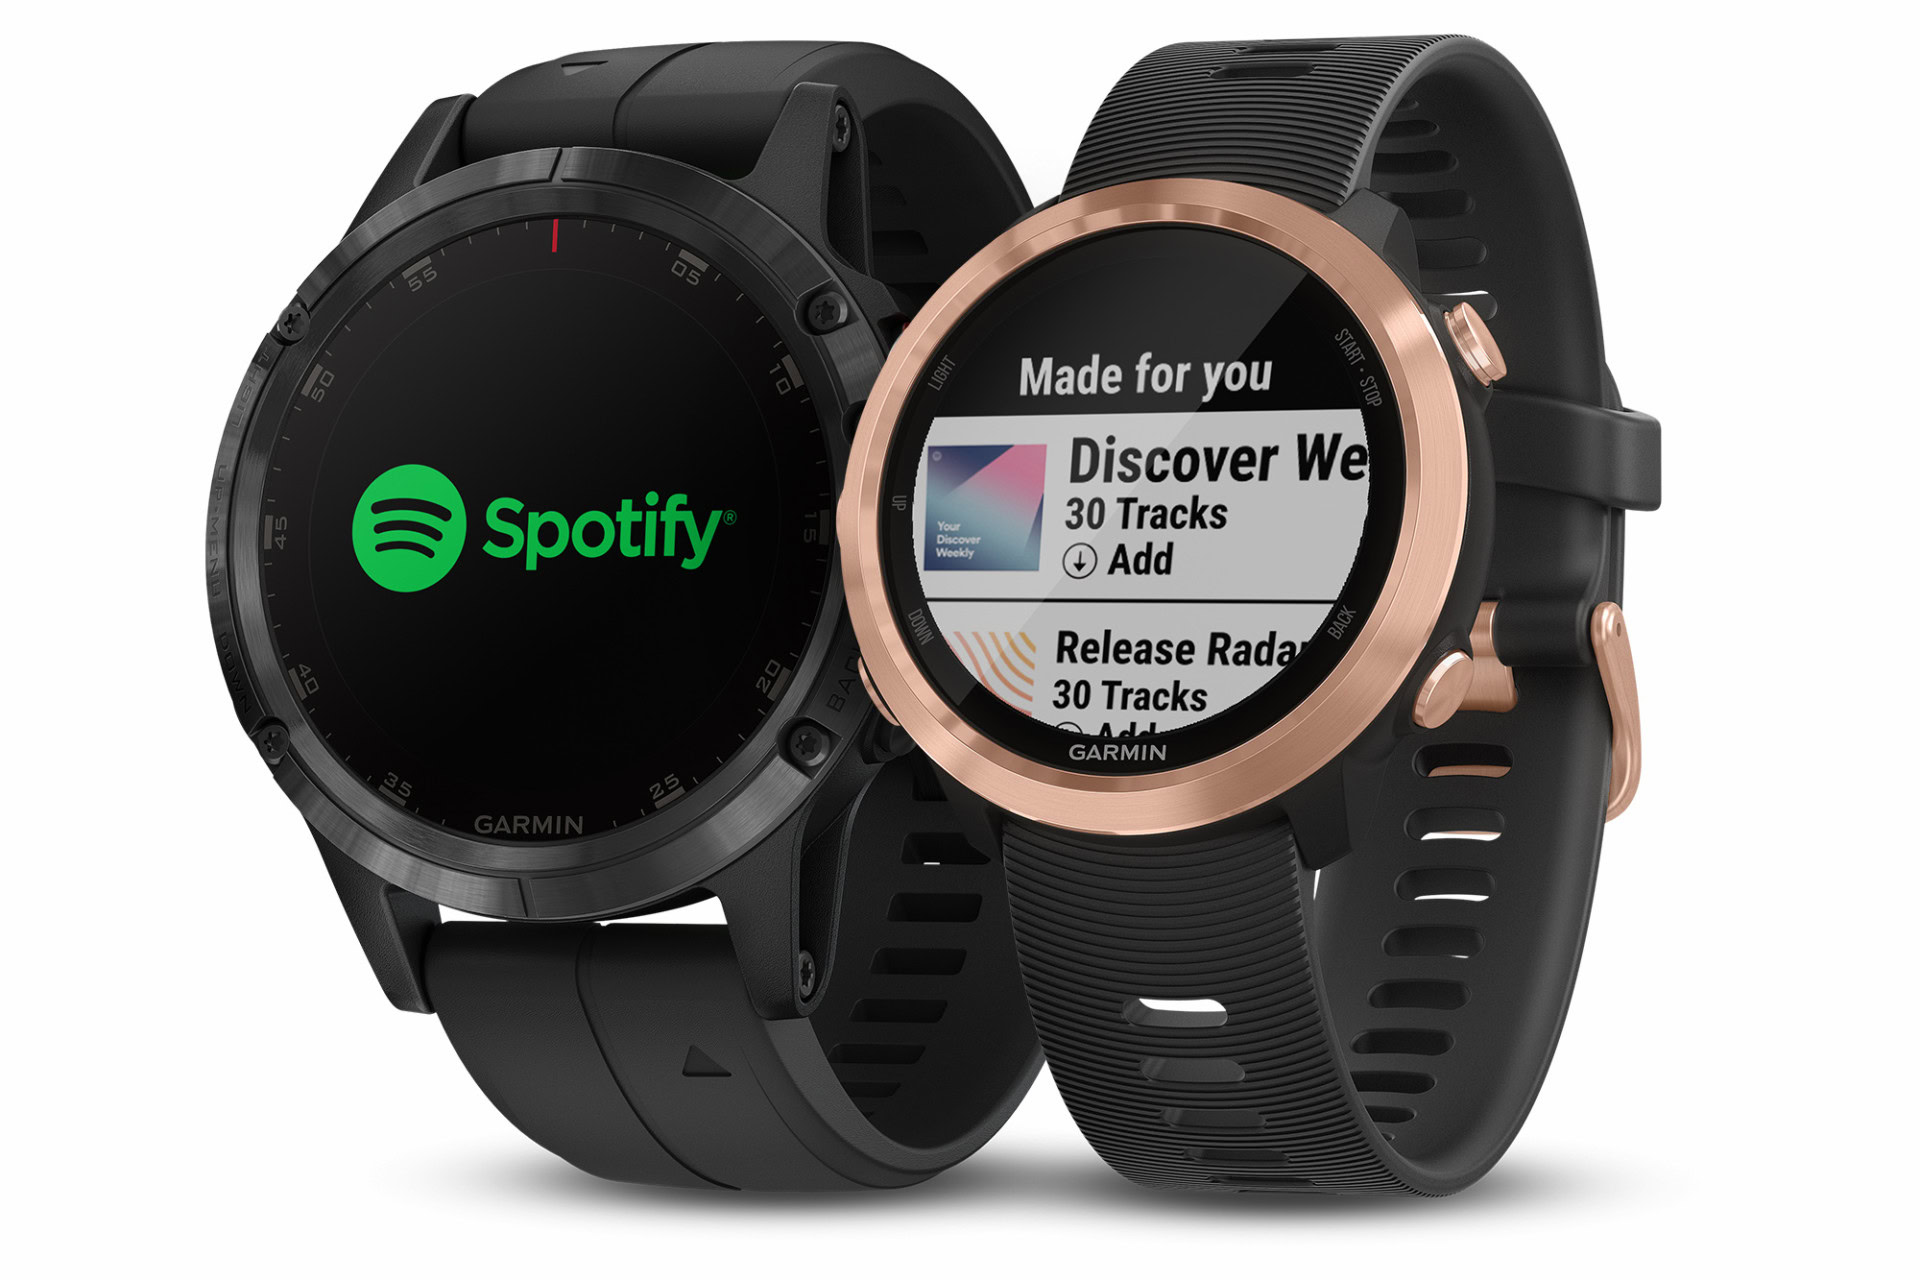 gps running watch with spotify